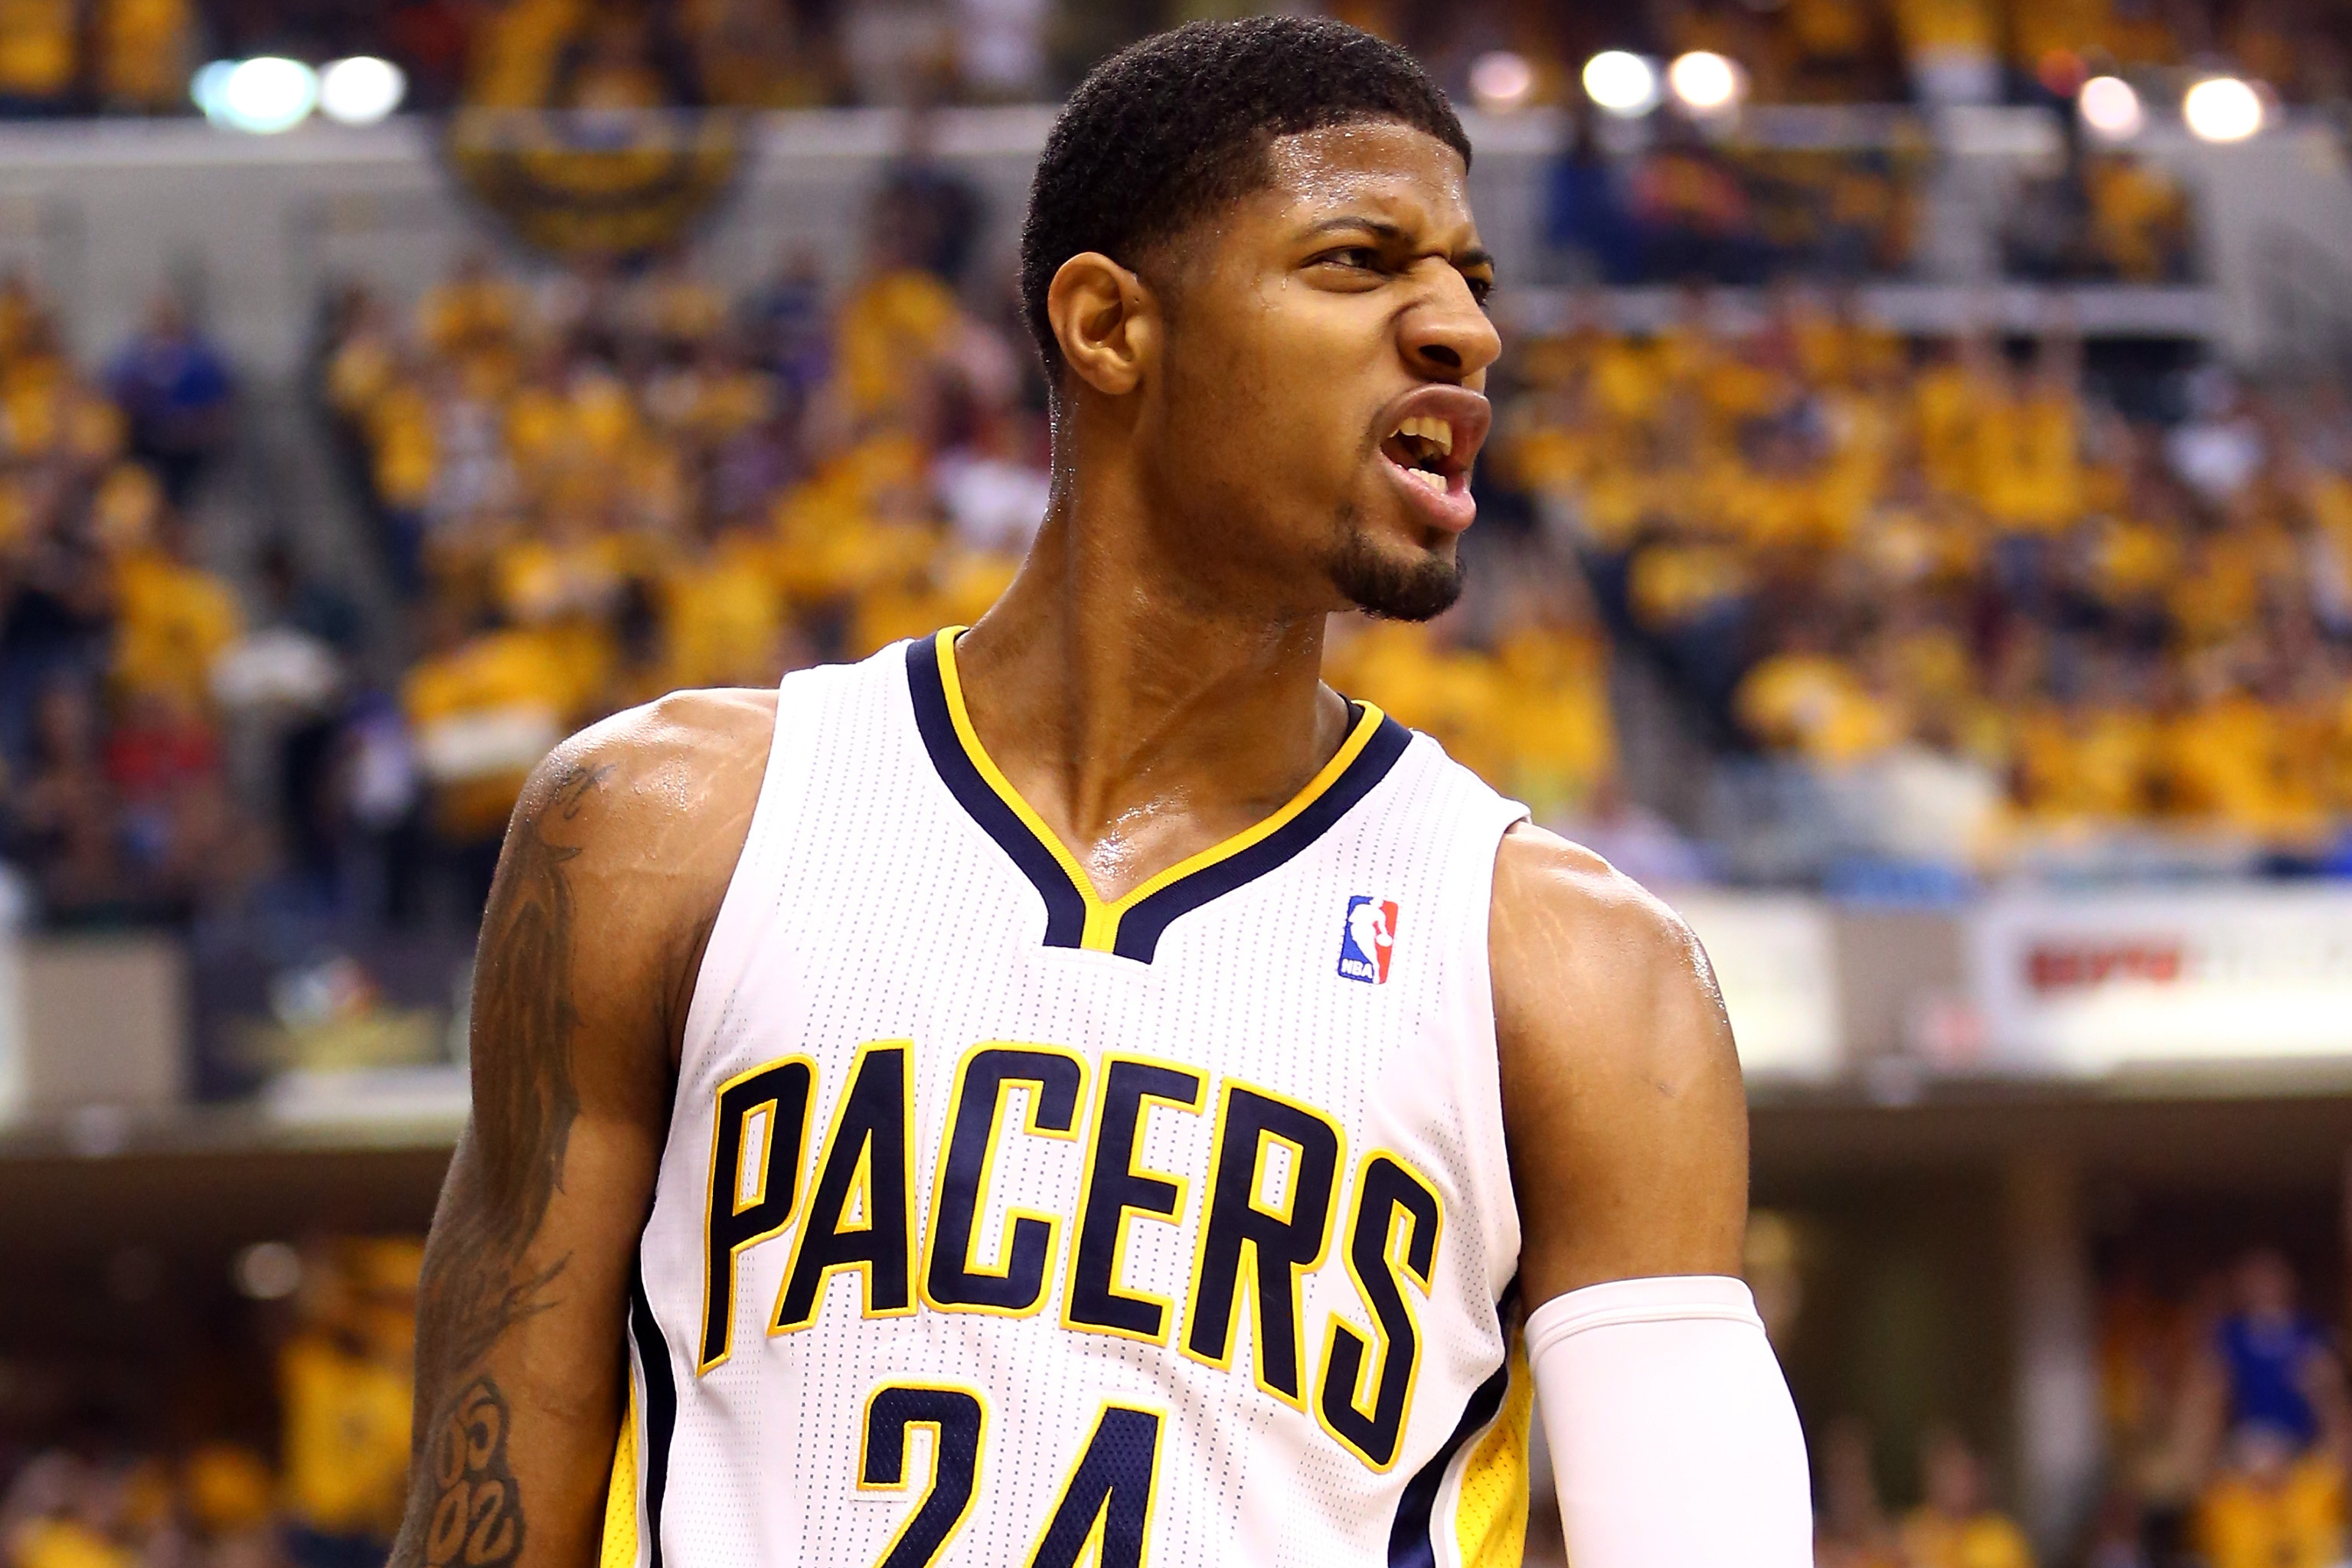 Report: Pacers' Paul George to receive $7 million for All-NBA Team  selection - Sports Illustrated